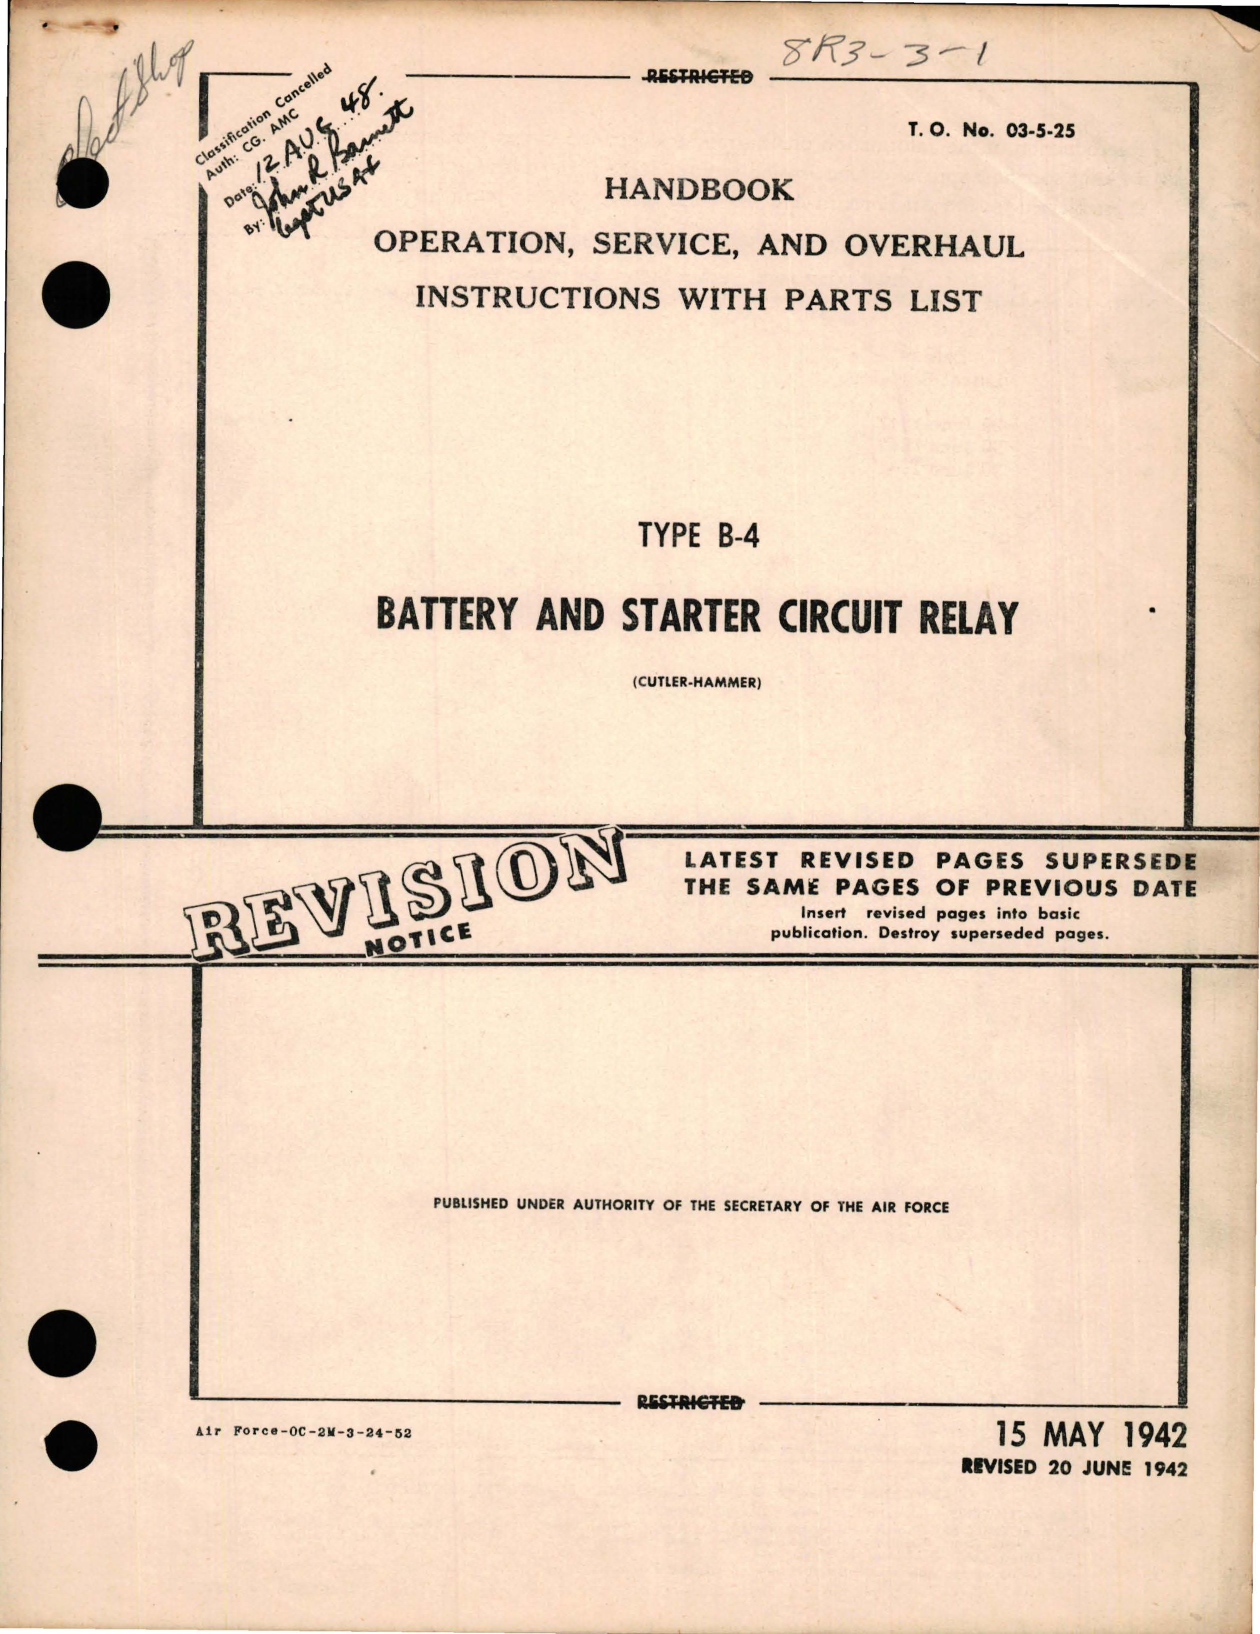 Sample page 1 from AirCorps Library document: Operation, Service and Overhaul Instructions with Parts List for Battery and Starter Circuit Relay - Type B-4